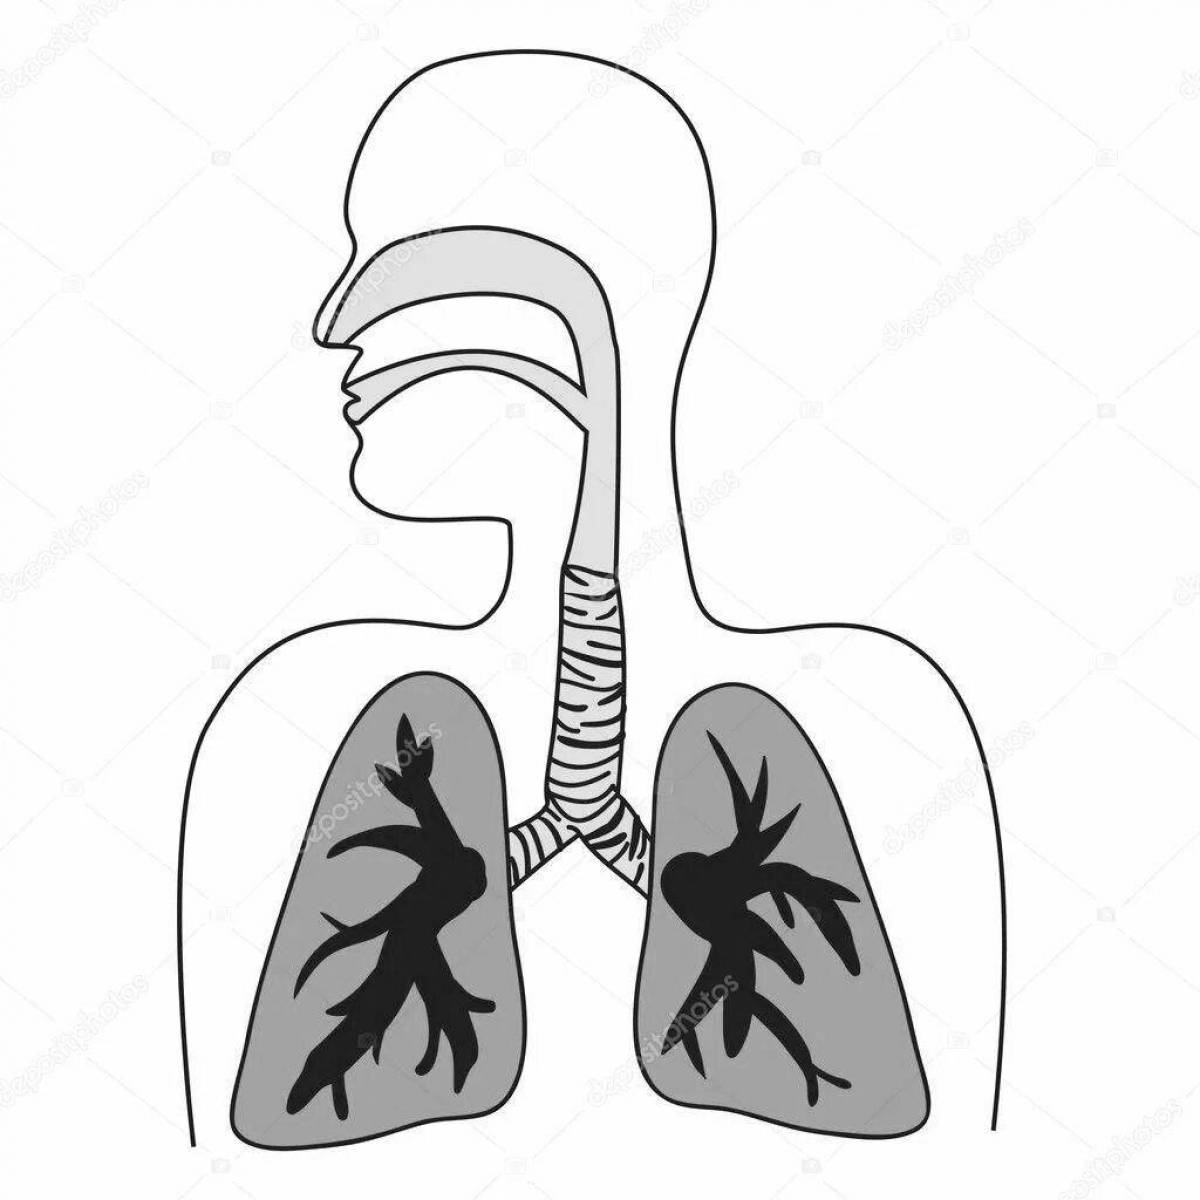 Coloring page of complex respiratory system